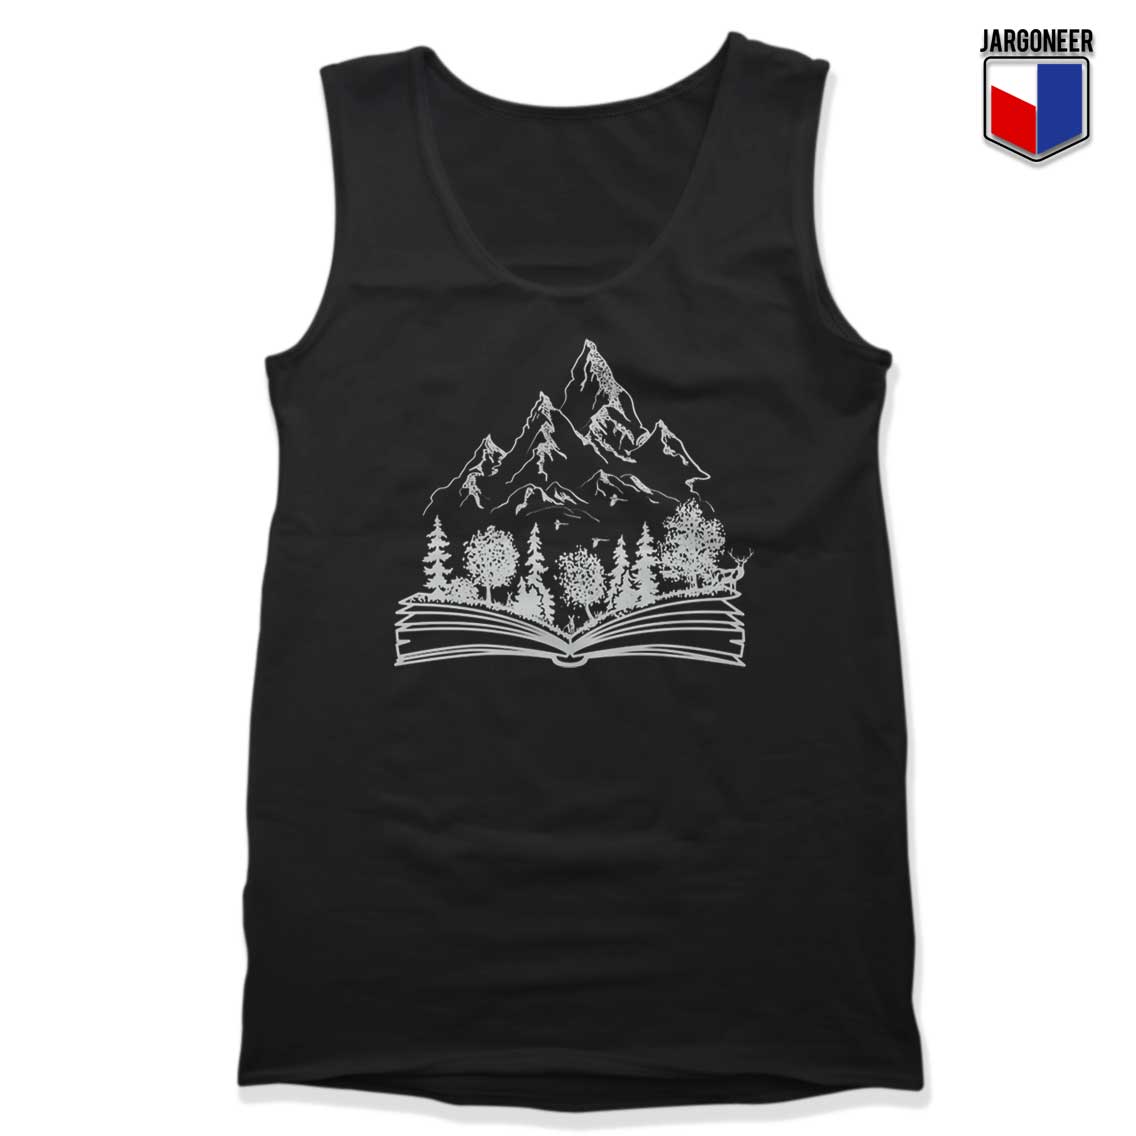 Open Book With Forest and Mountains Tank Top - Shop Unique Graphic Cool Shirt Designs